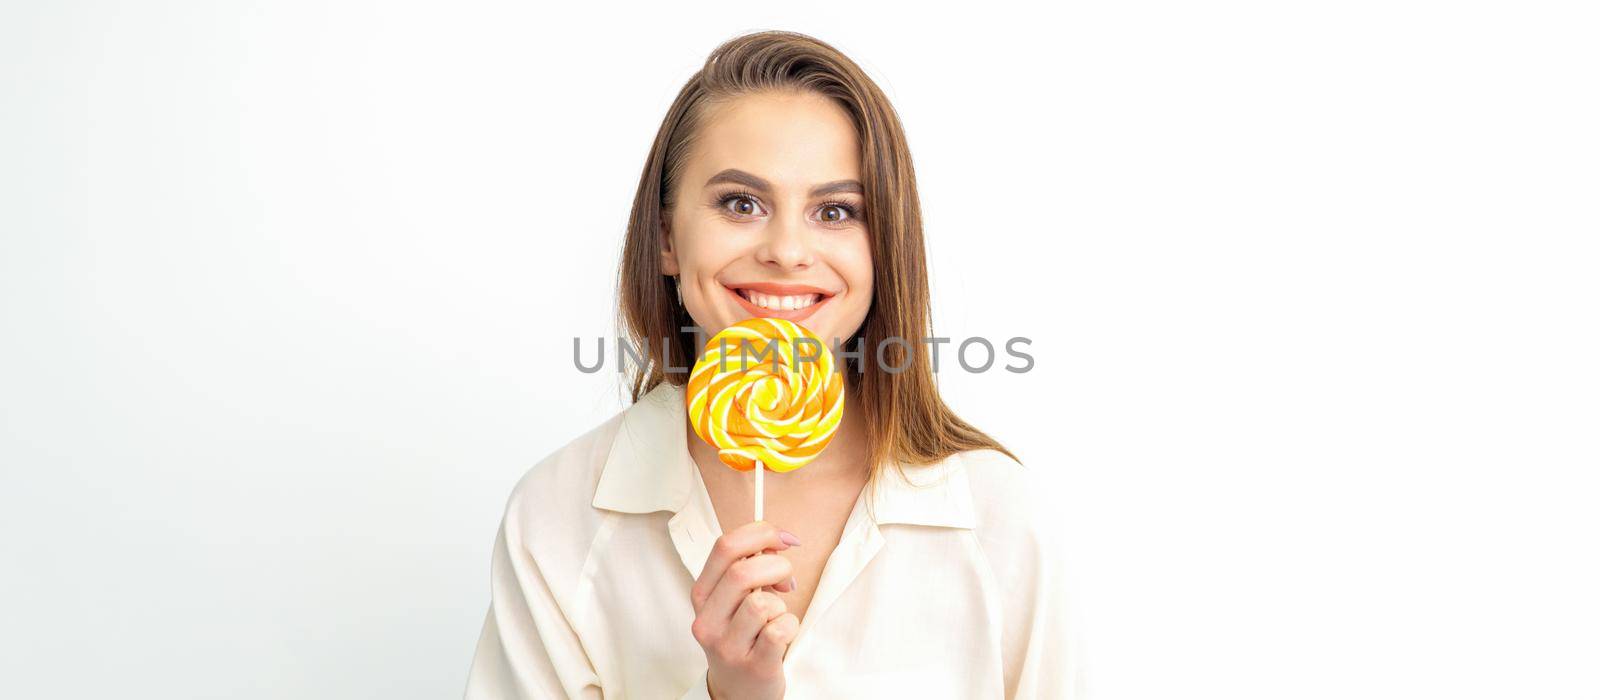 Beautiful young caucasian woman wearing a white shirt licking a lollipop on a white background